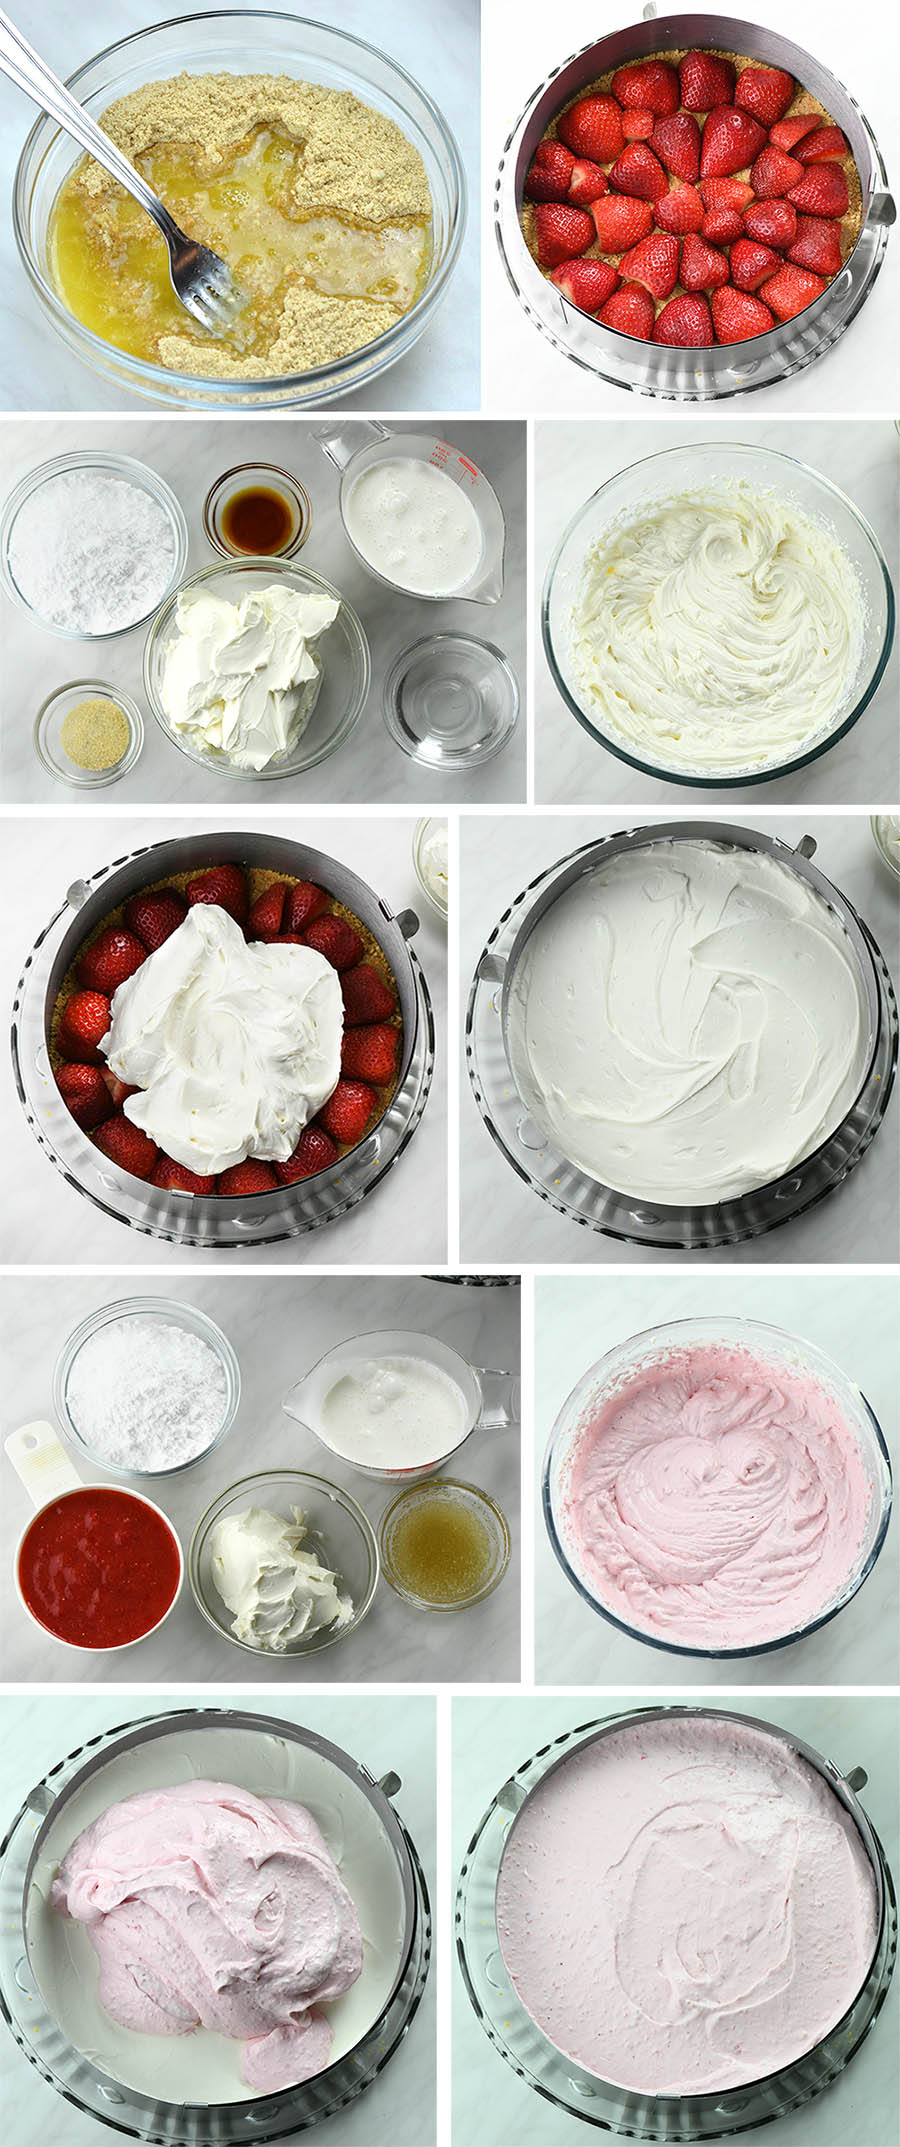 Step-by-step instructions for Layered No-Bake Strawberry Cheesecake.